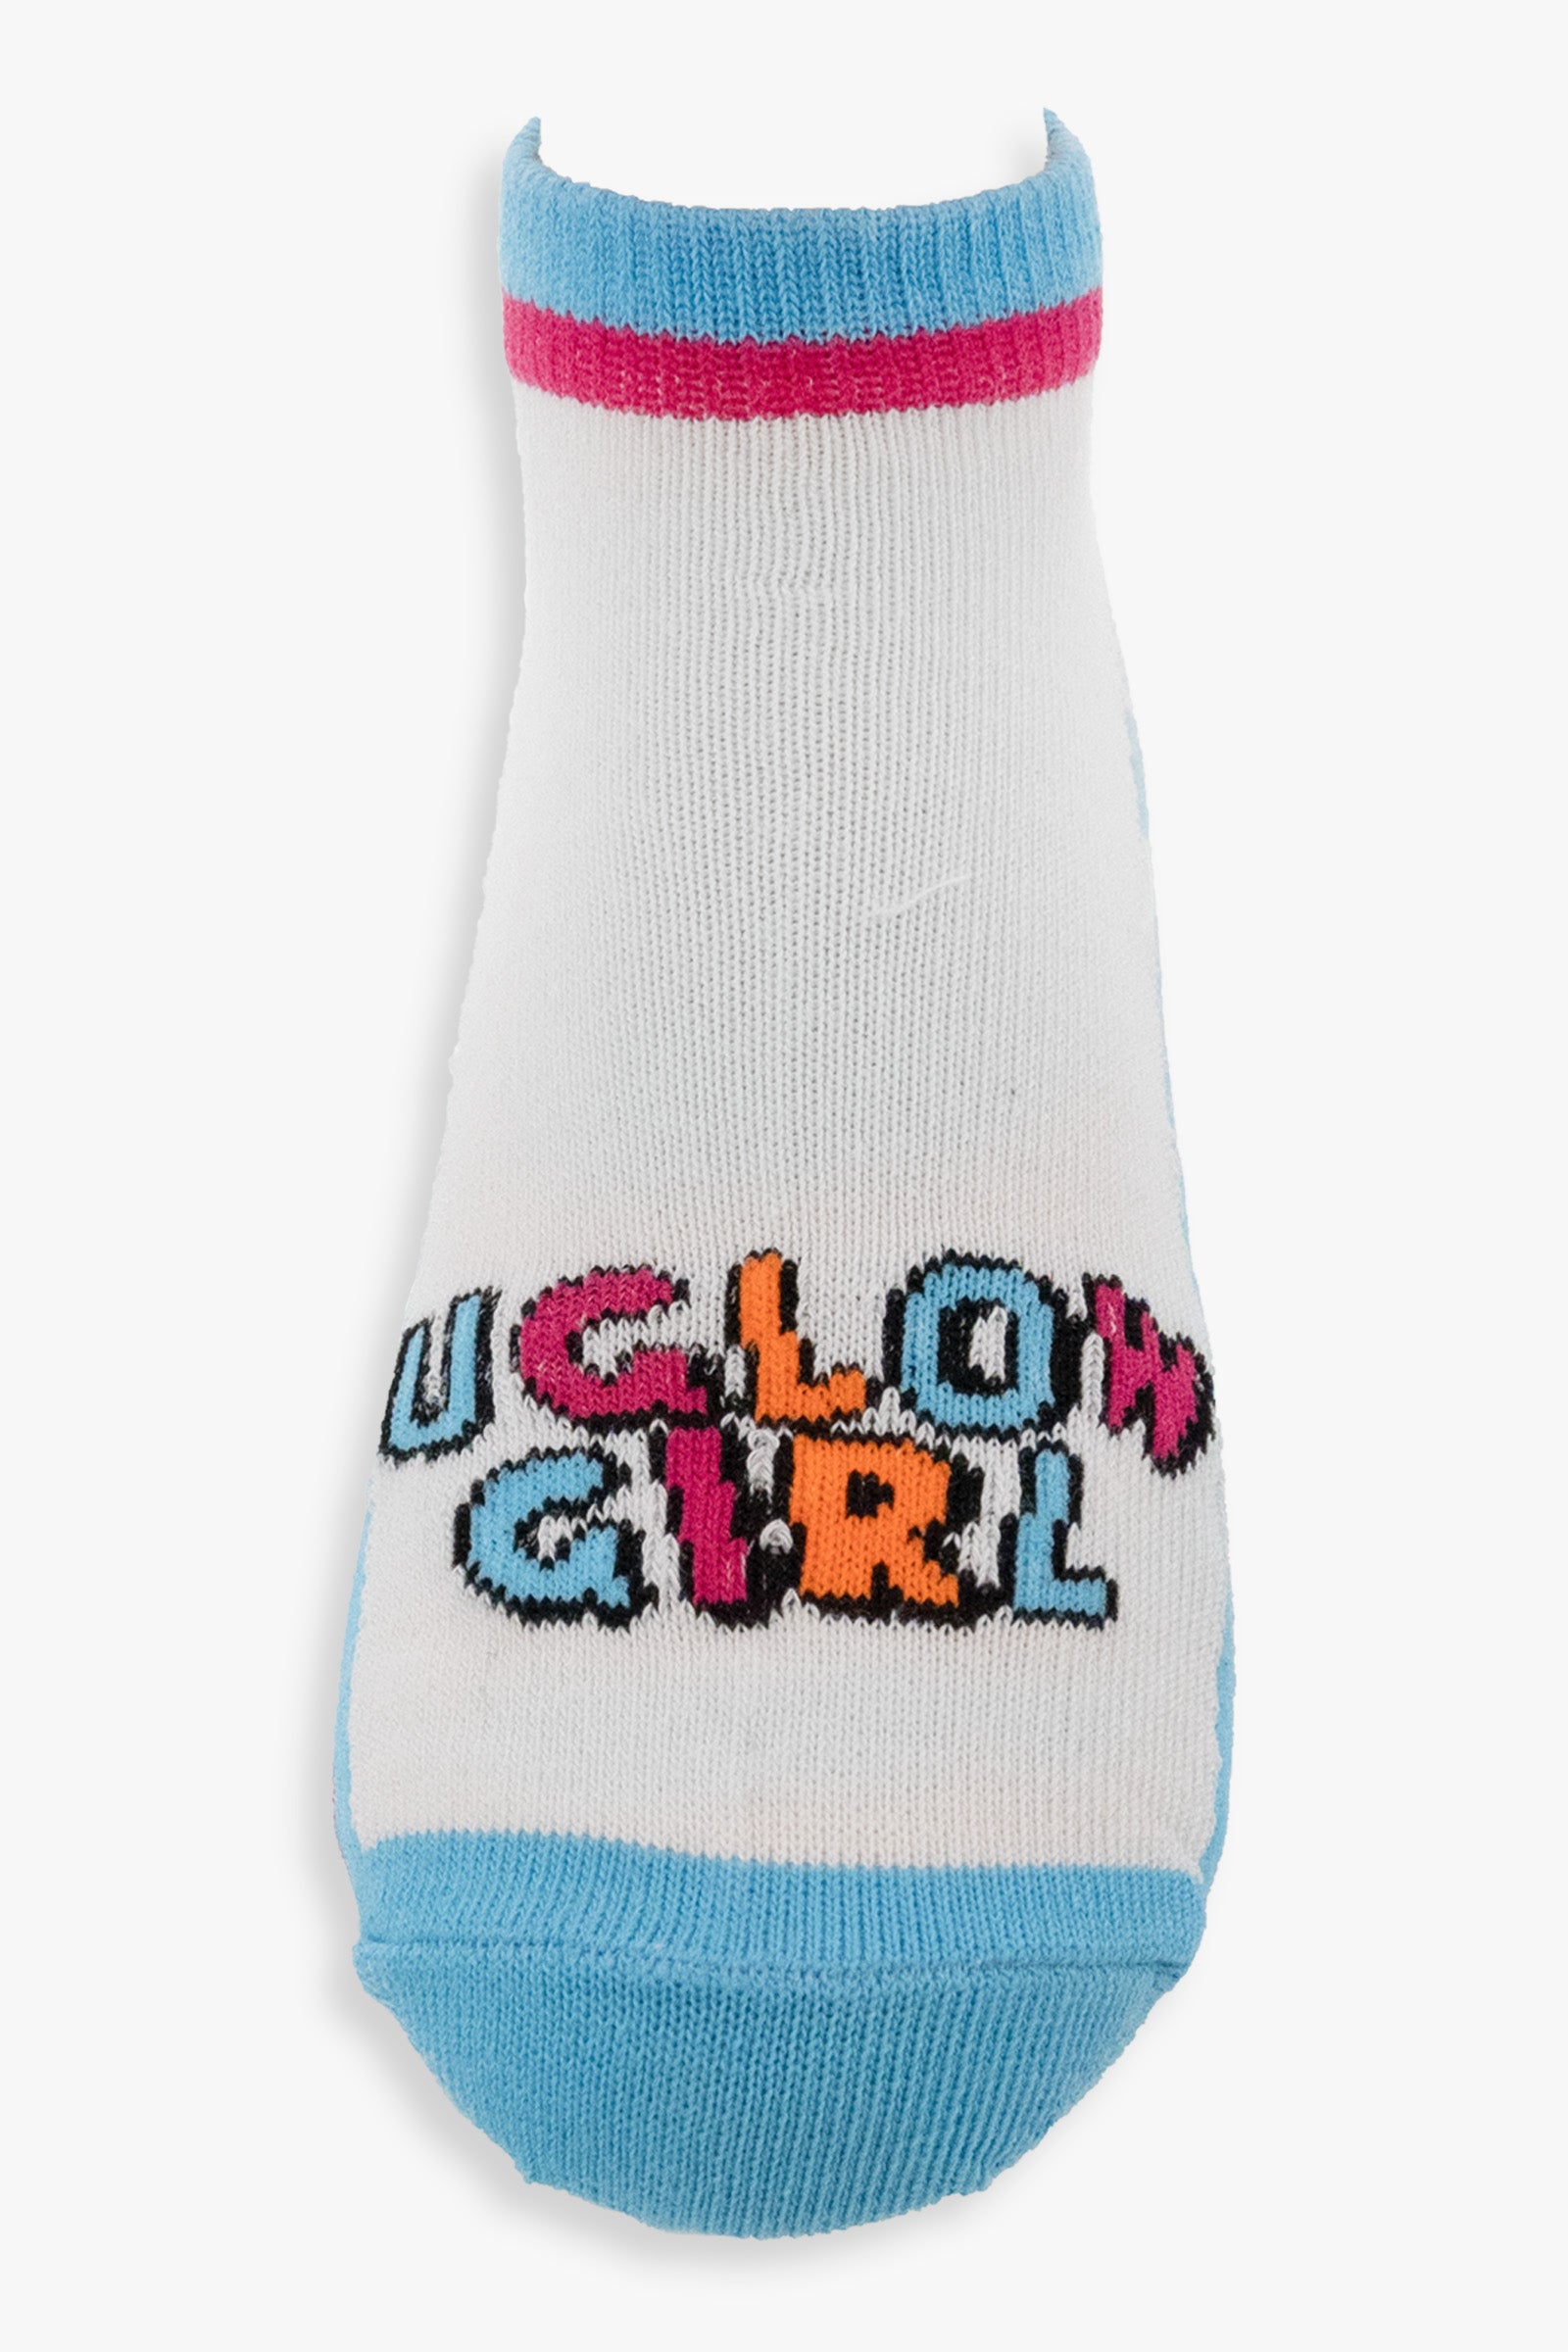 L.O.L. Surprise Youth Girls 3-Pack No-Show Ankle Socks